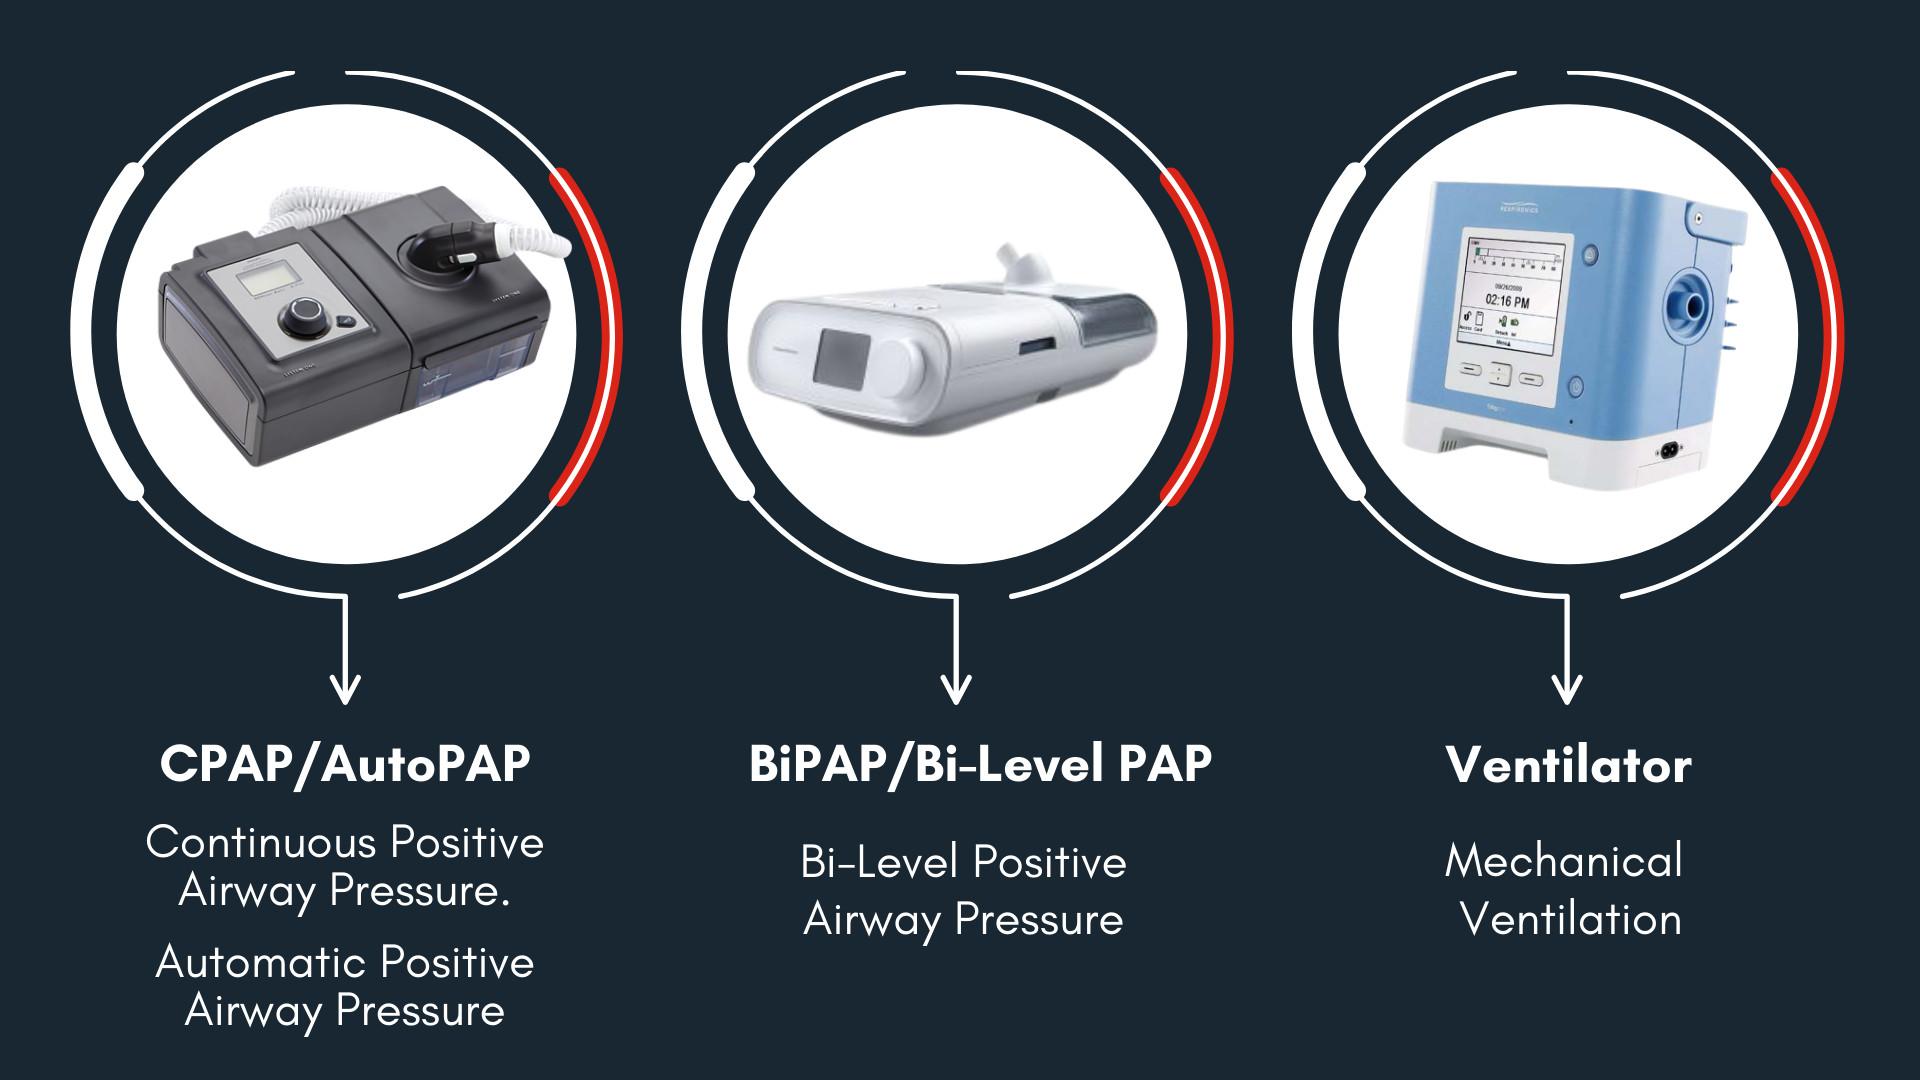 CPAP, BiPAP, and ventilator injuries in Birmingham can have serious consequences.